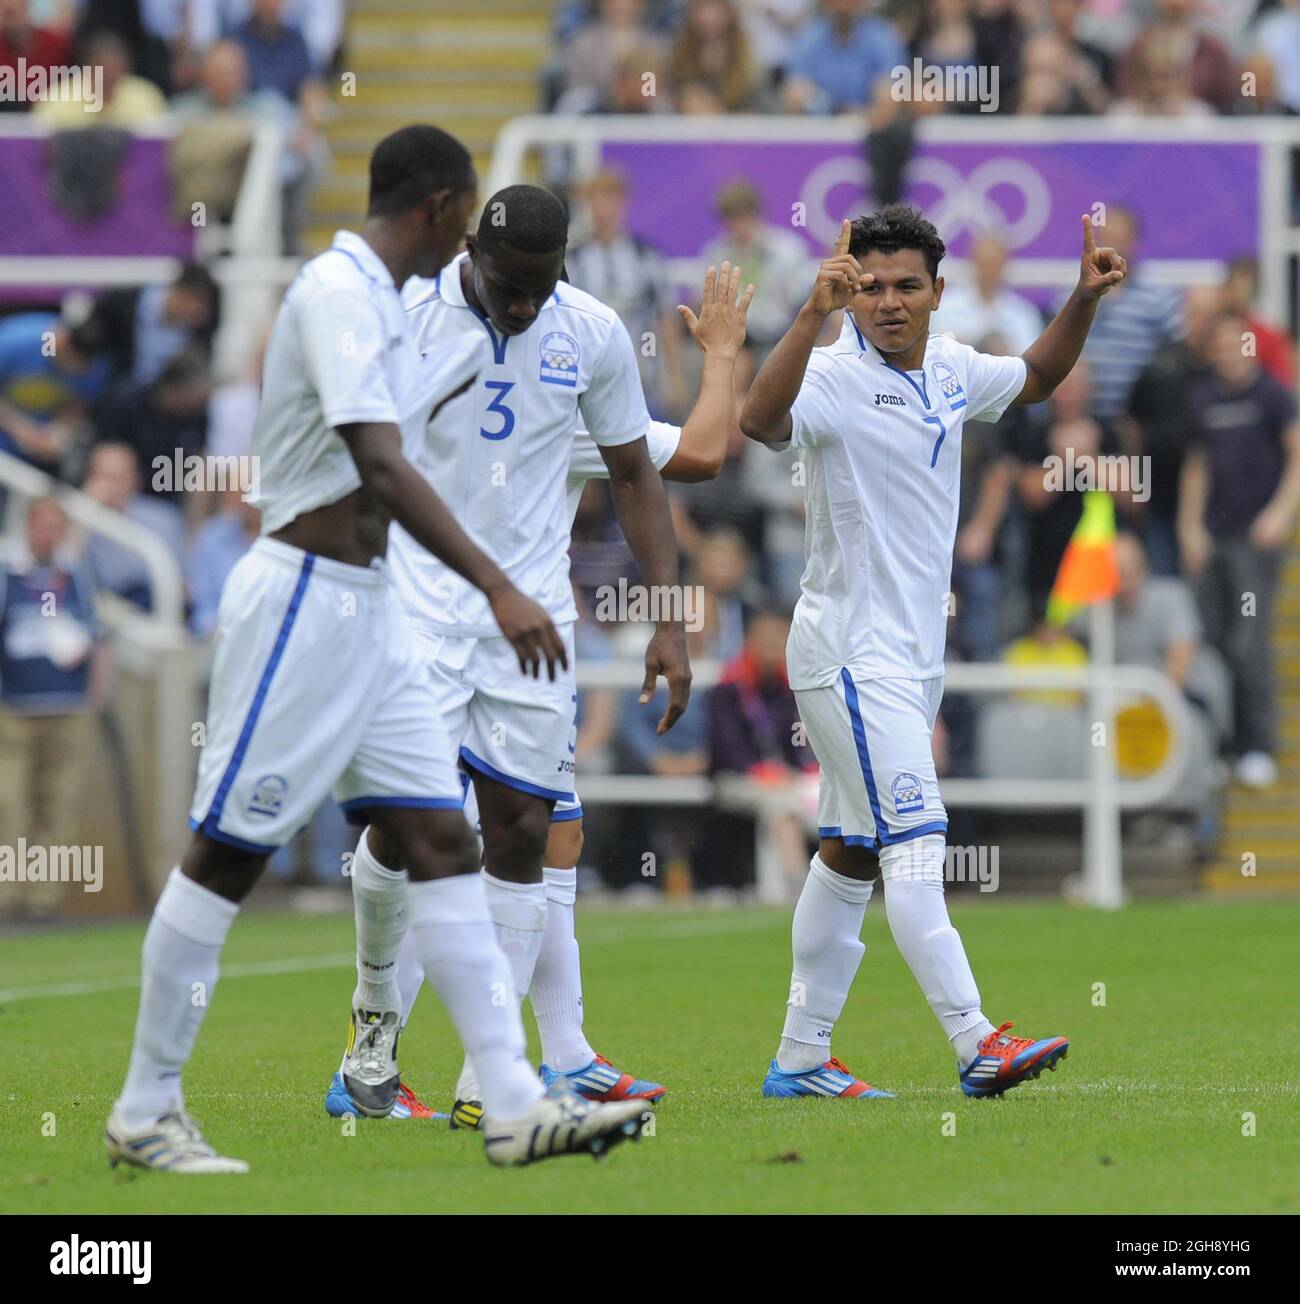 Honduras' Mario Martinez (R) celebrates scoring his side's first goal during the London Olympic 2012 quarter final men's football match between Brazil v Honduras at St. James' Park, Newcastle upon Tyne on the 4th August 2012. Stock Photo